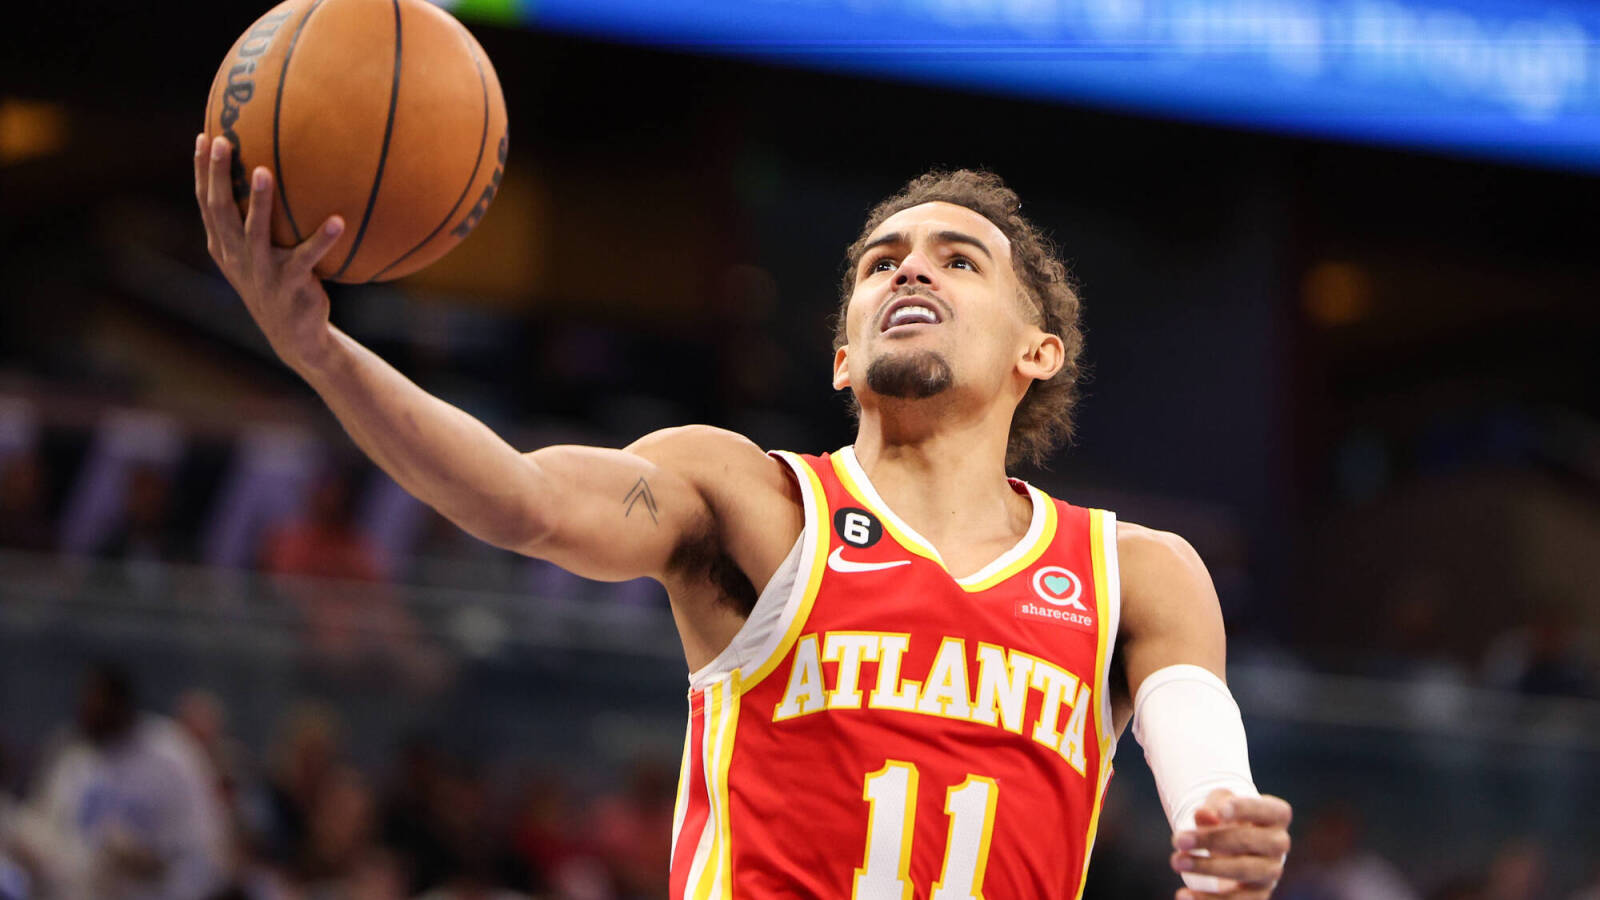 Report: Trae Young skipped game after argument with coach